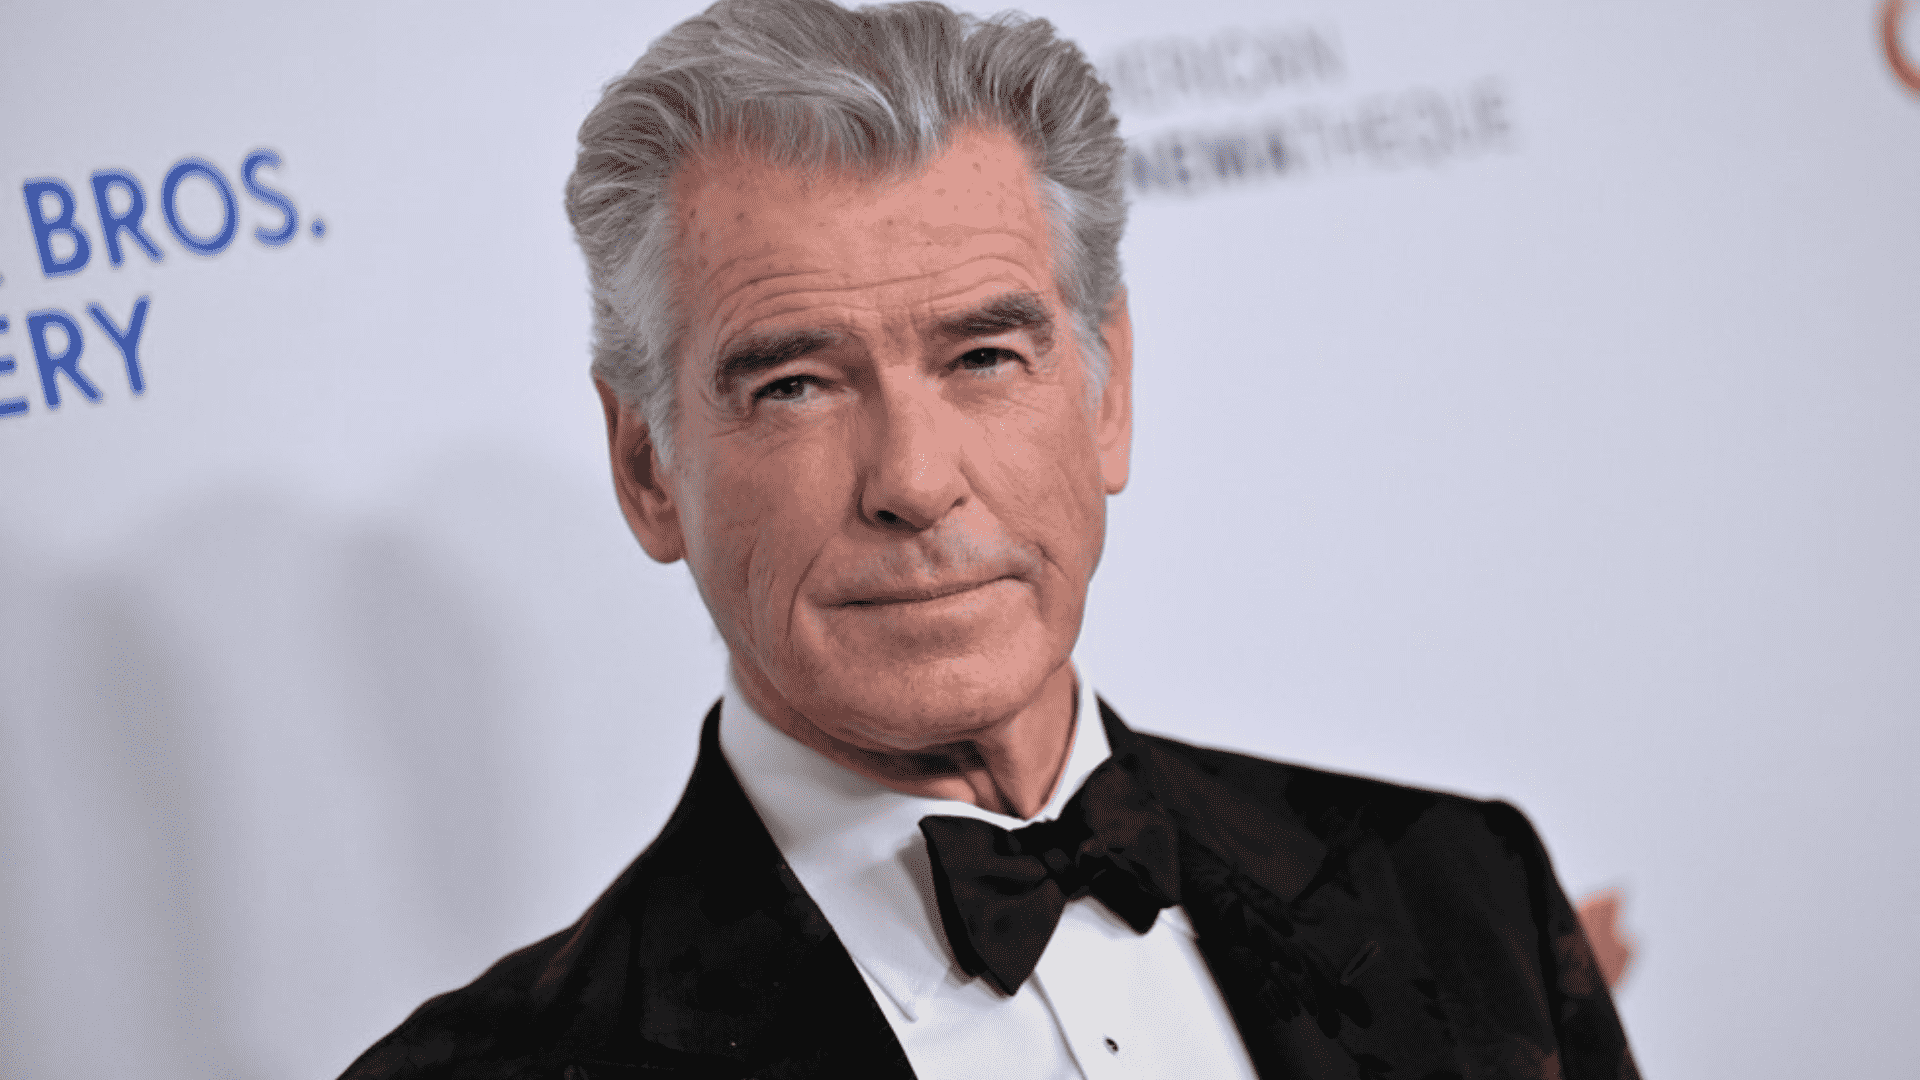 Pierce Brosnan to star in Simon Barry's 'A Spy's Guide to Survival'